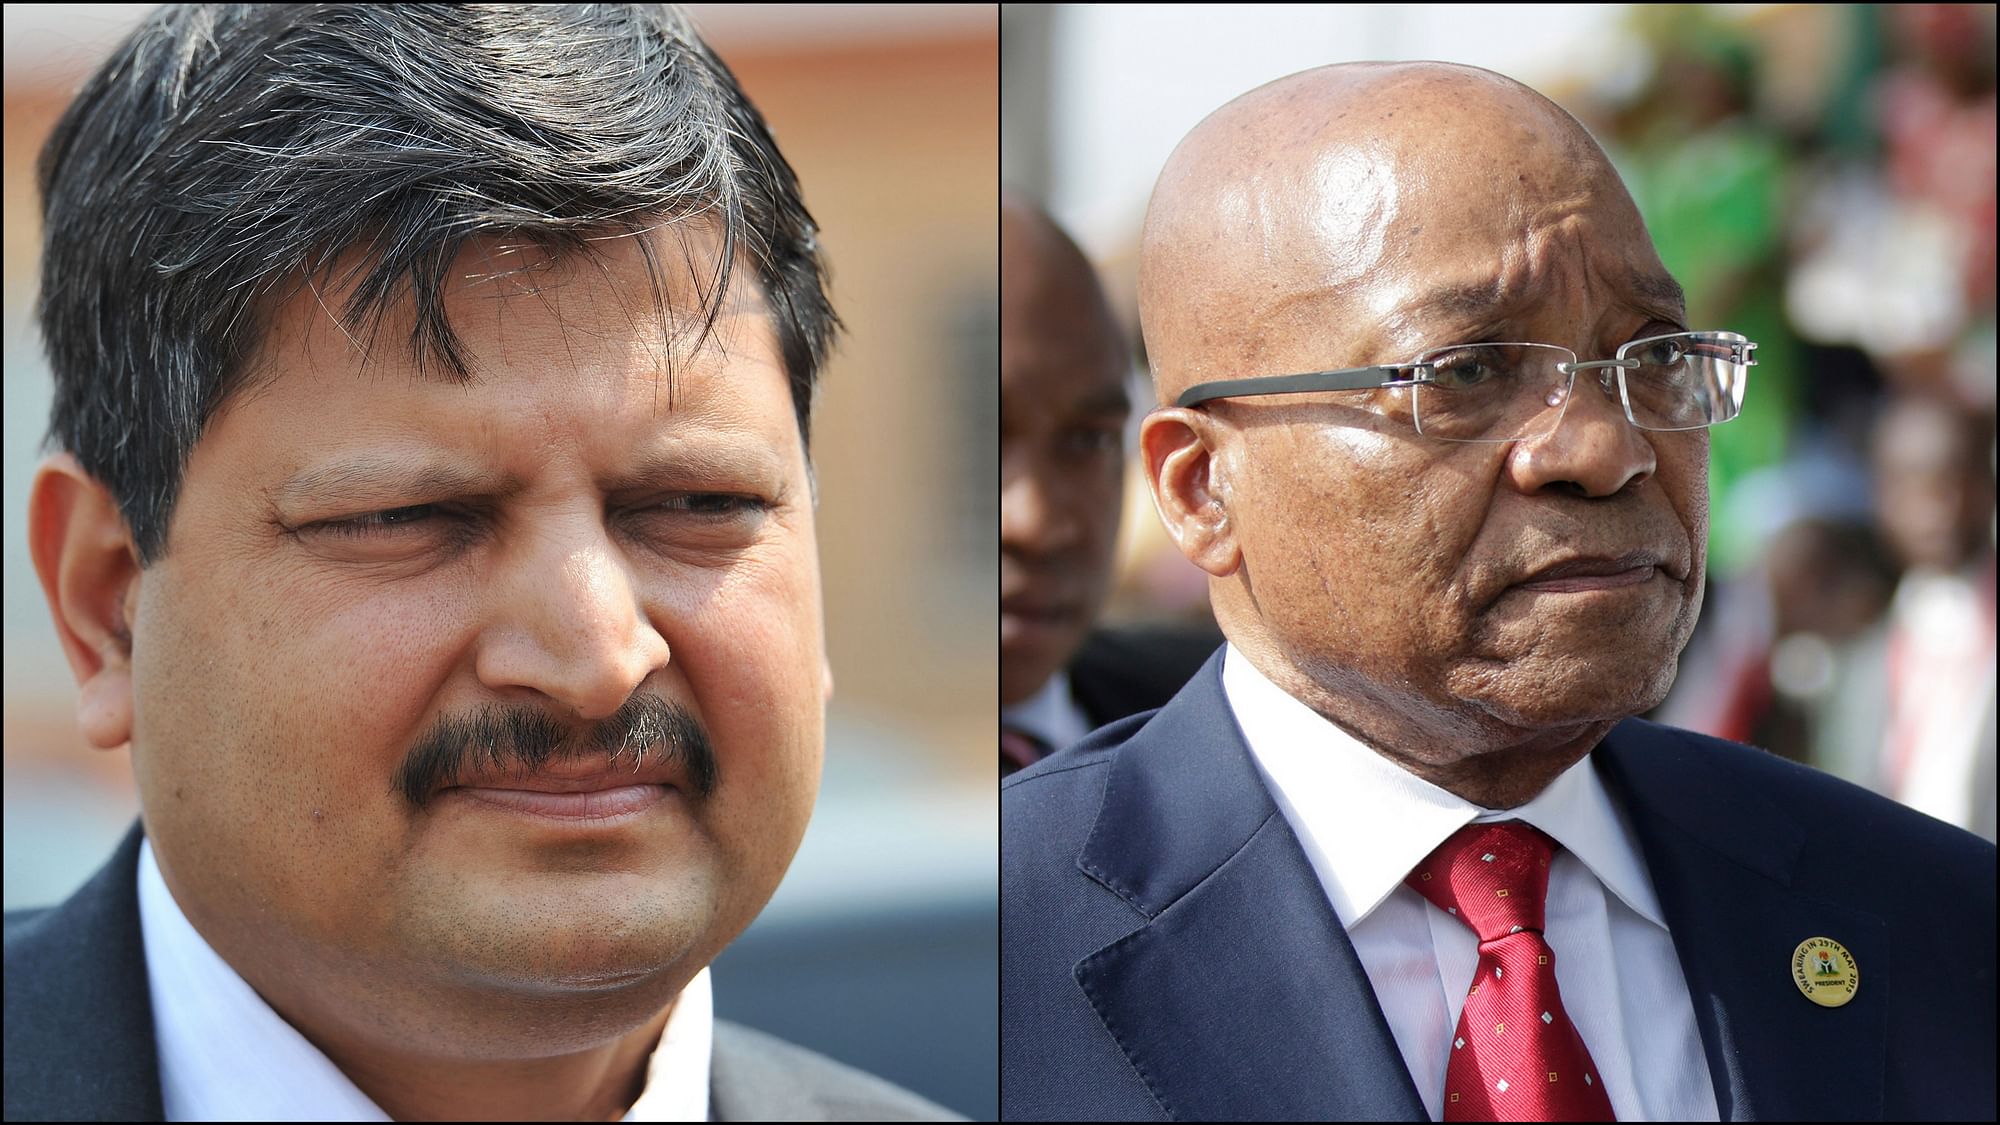 File image of Atul Gupta (L) outside magistrates courts in Johannesburg. The wealthy Gupta family has been criticised for allegedly improper links to president Jacob Zuma (R).